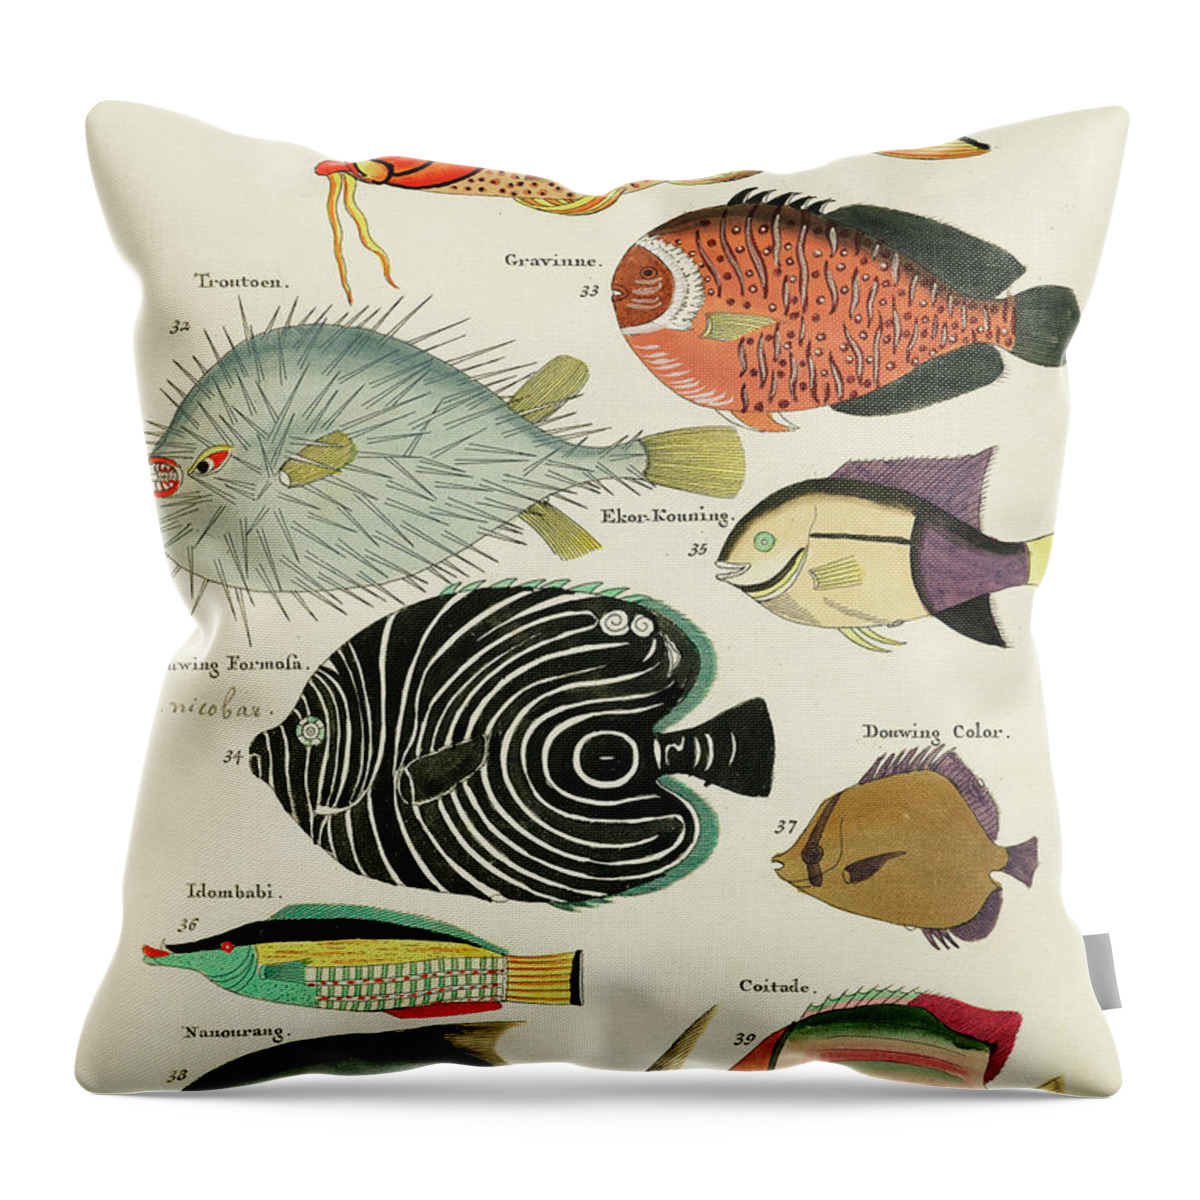 Fish Throw Pillow featuring the digital art Vintage, Whimsical Fish and Marine Life Illustration by Louis Renard - Baard Mannetje, Formosa by Louis Renard